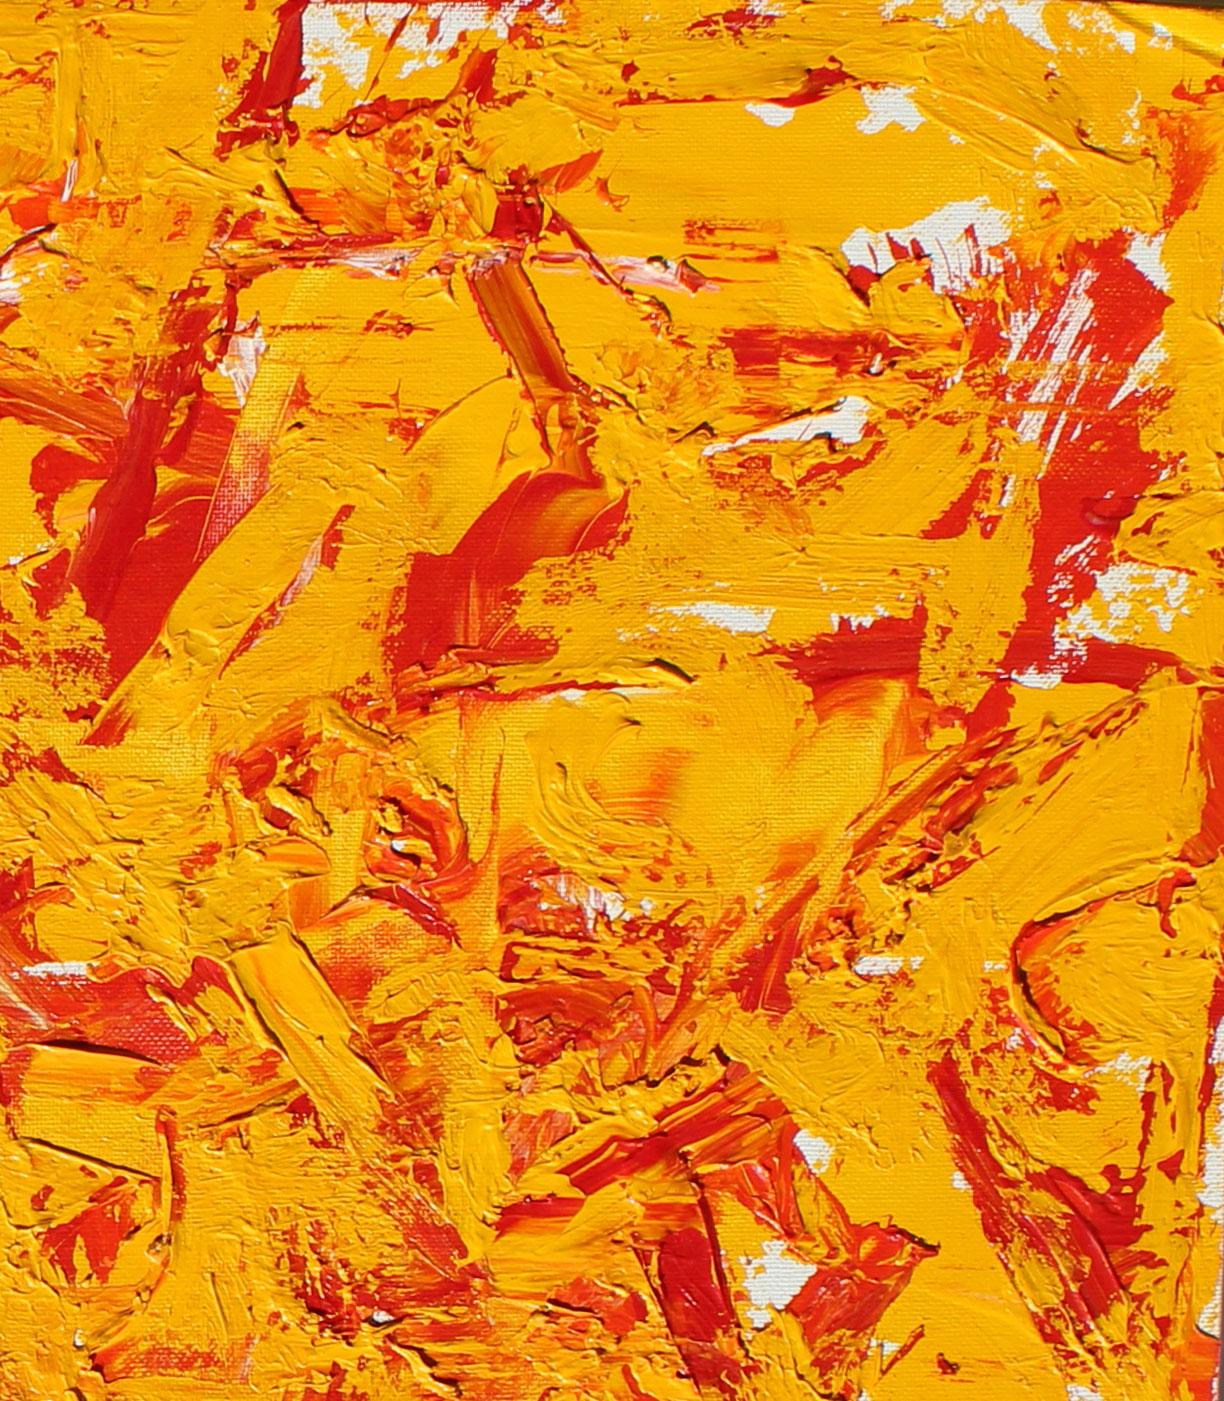 Red and Yellow  - Abstract Painting by Harry Bertschmann